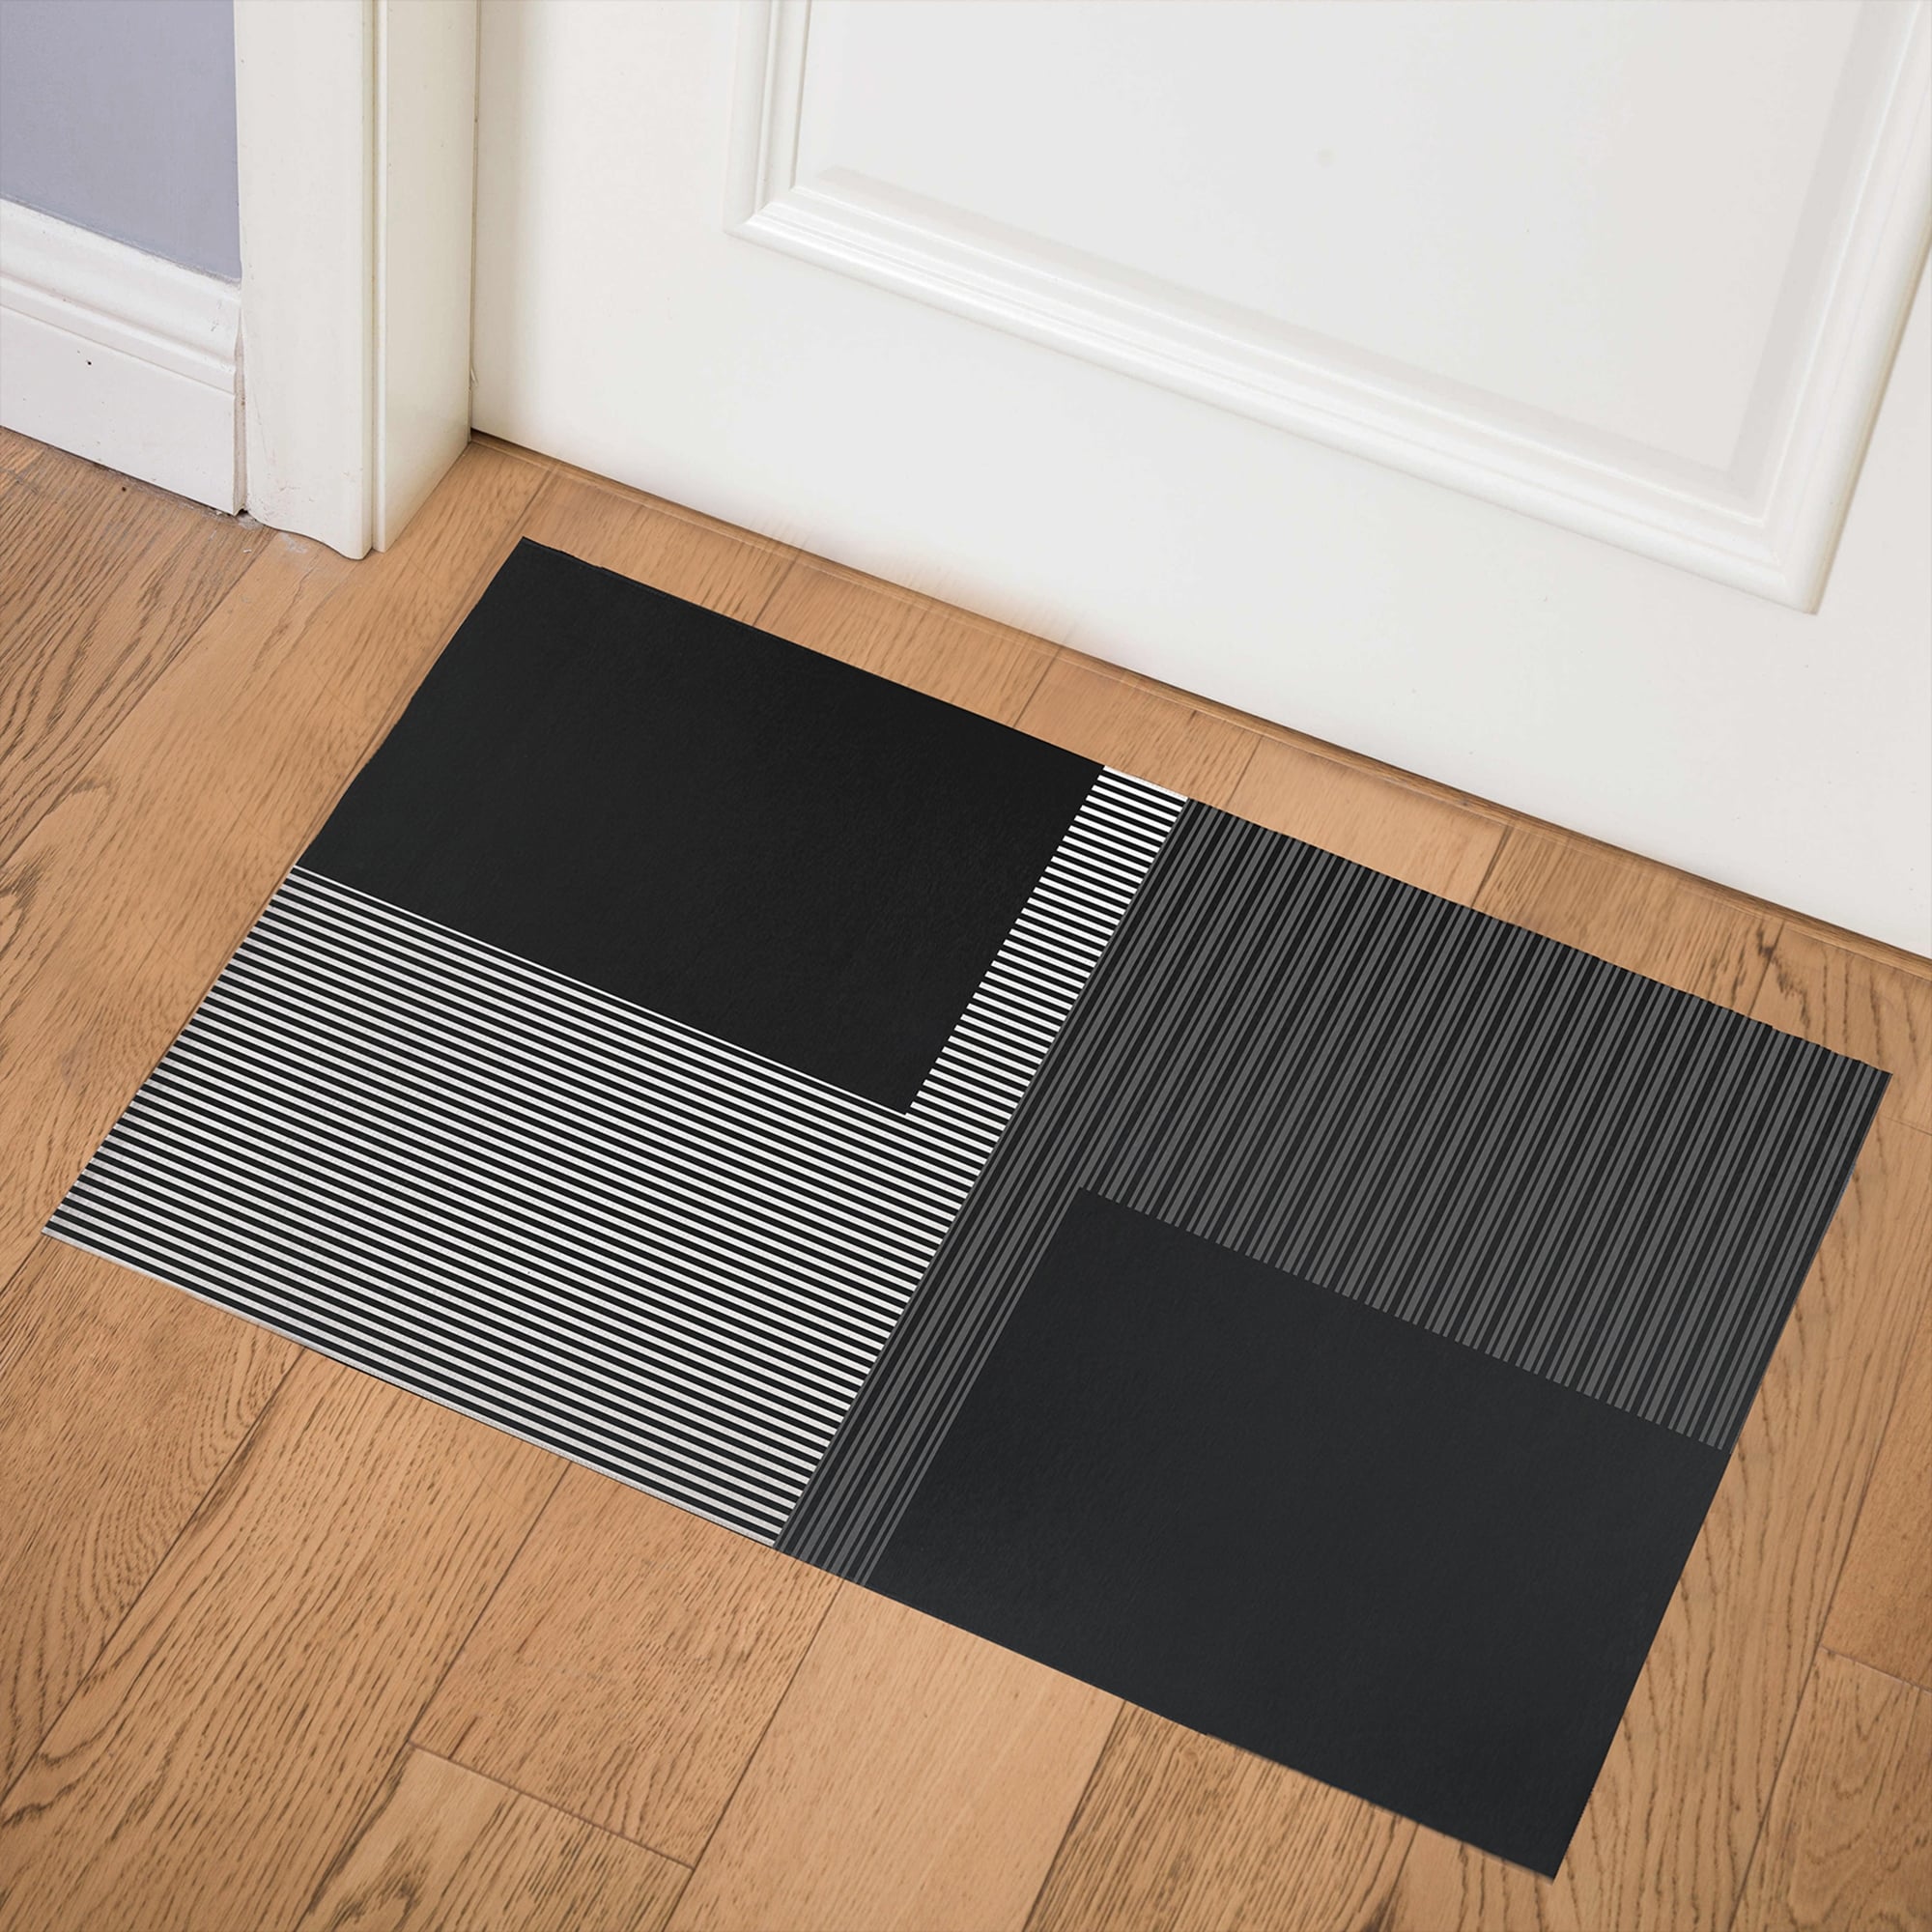 https://ak1.ostkcdn.com/images/products/is/images/direct/319efc5d413d6de5a8408f548aee5f45d9f21e55/FIGARO-BLACK-AND-WHITE-Indoor-Floor-Mat-By-Becky-Bailey.jpg